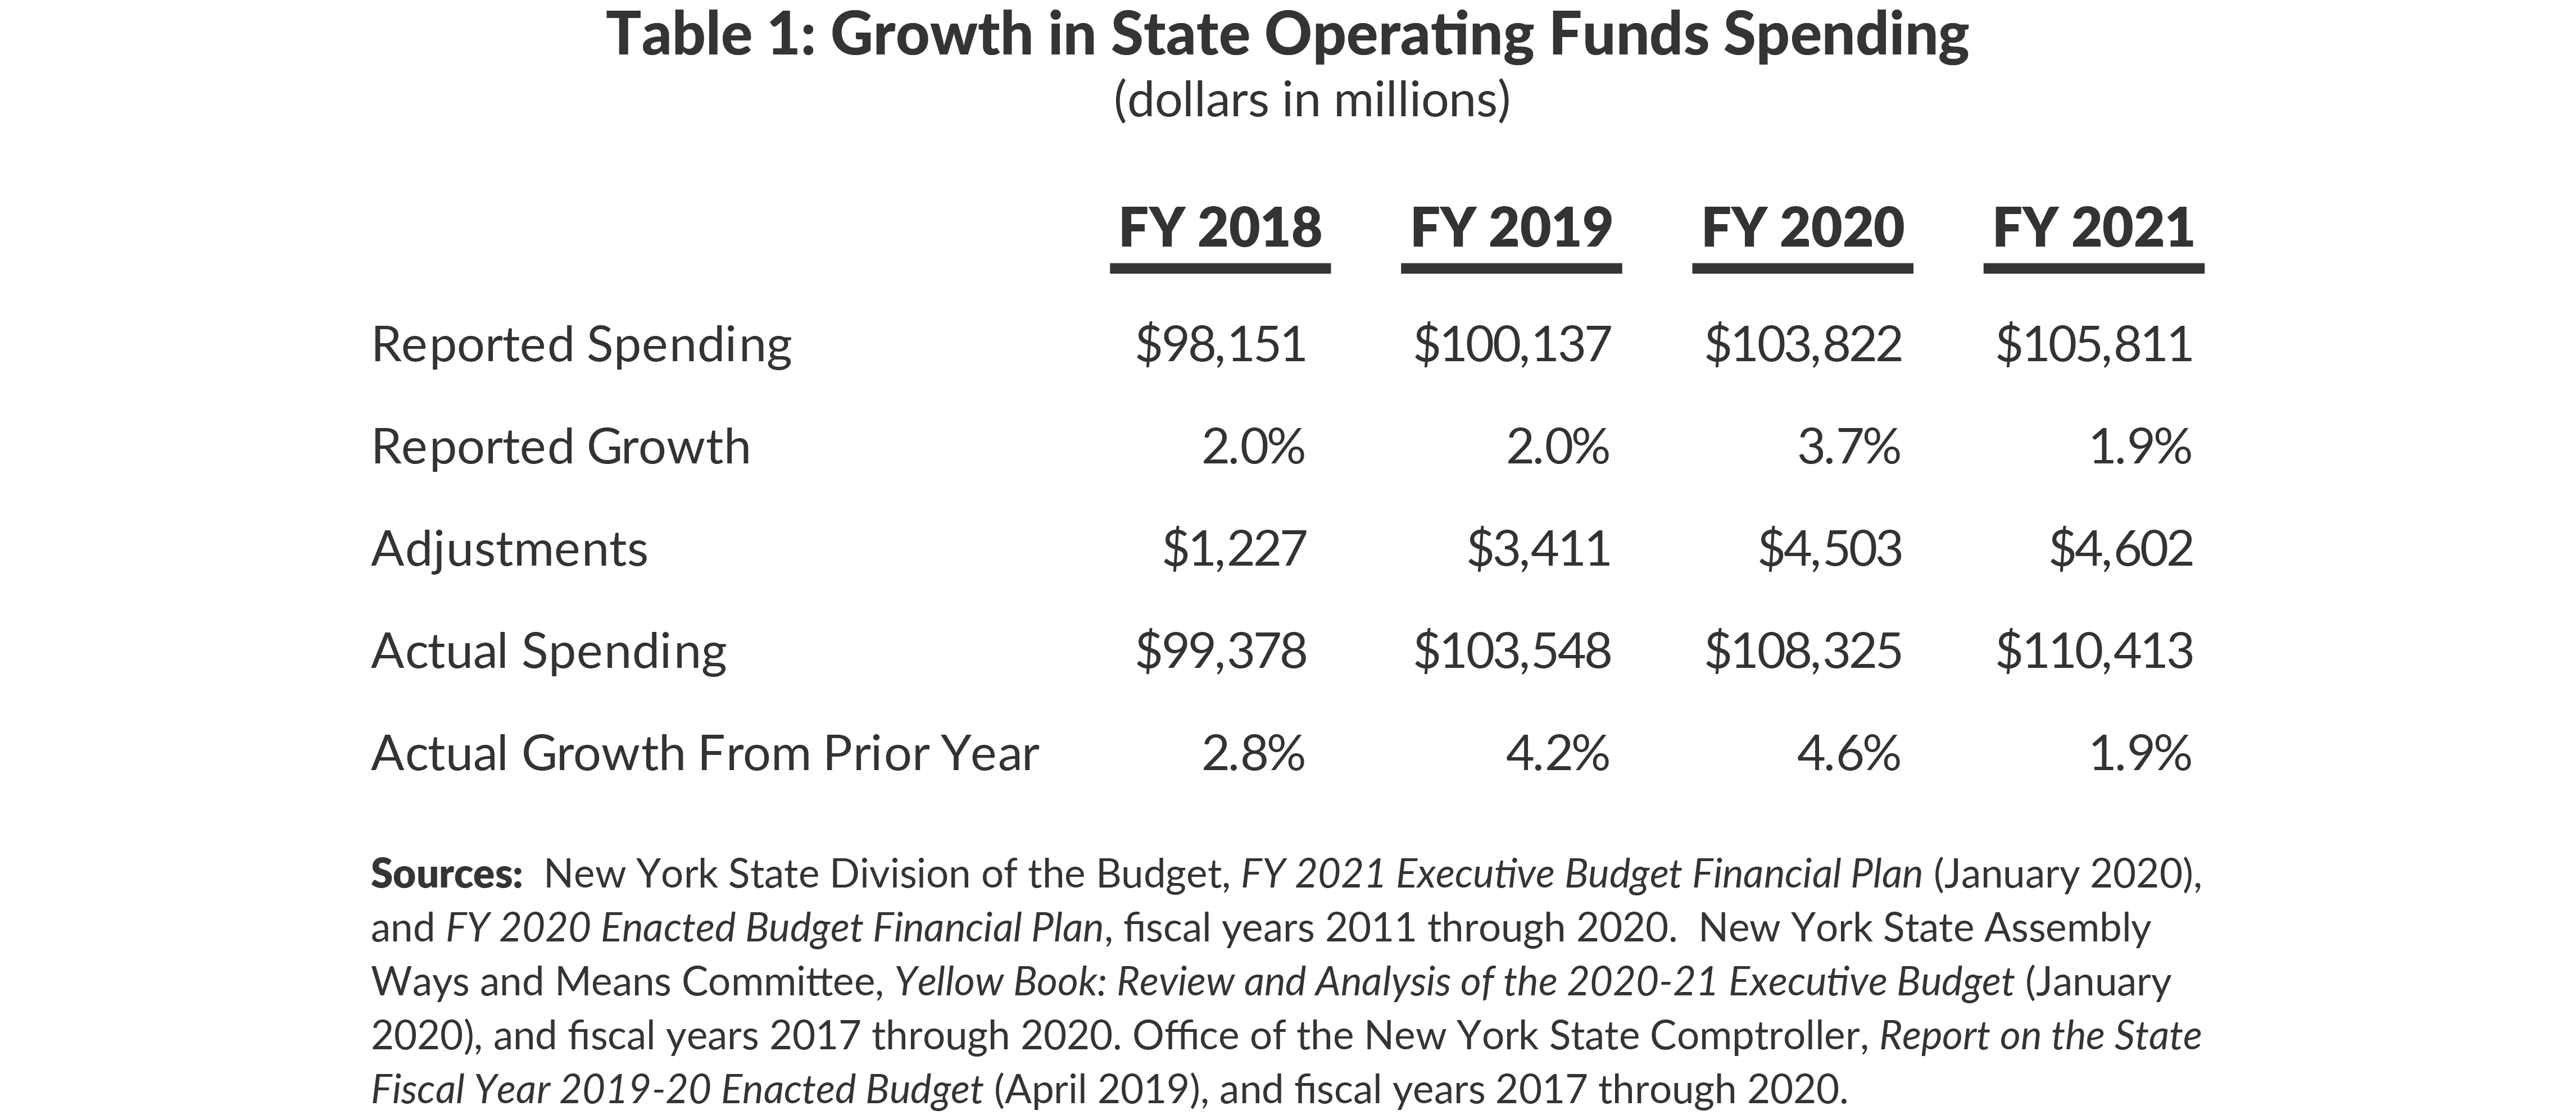 Table 1: Growth in State Operating Funds Spending